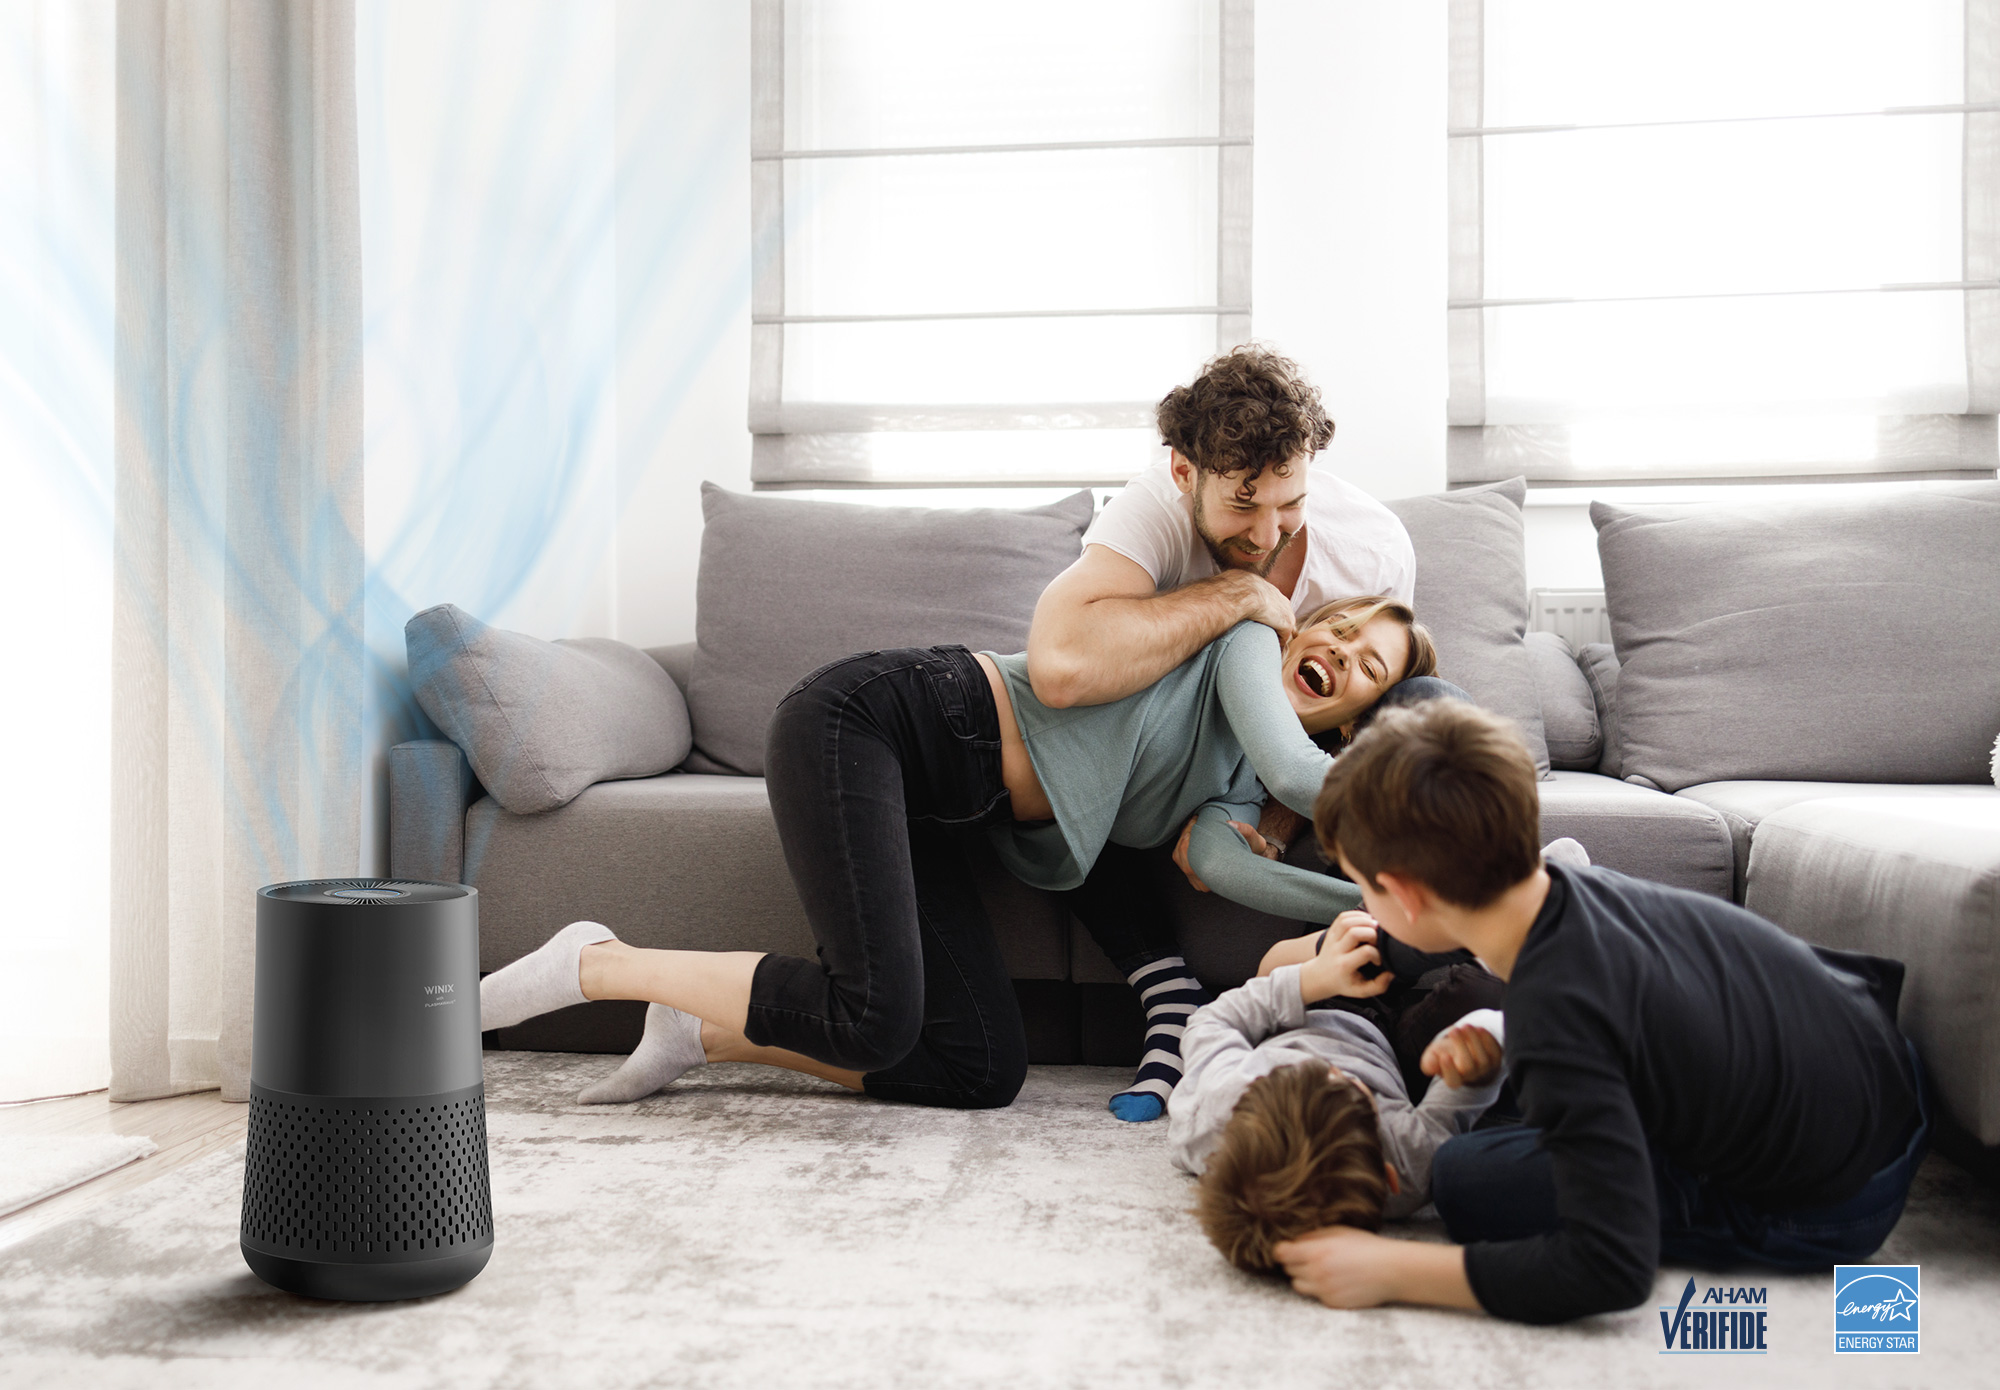 A230 Air Purifier on floor next to two parents playing with two children with AHAM verified logo and energy star logo